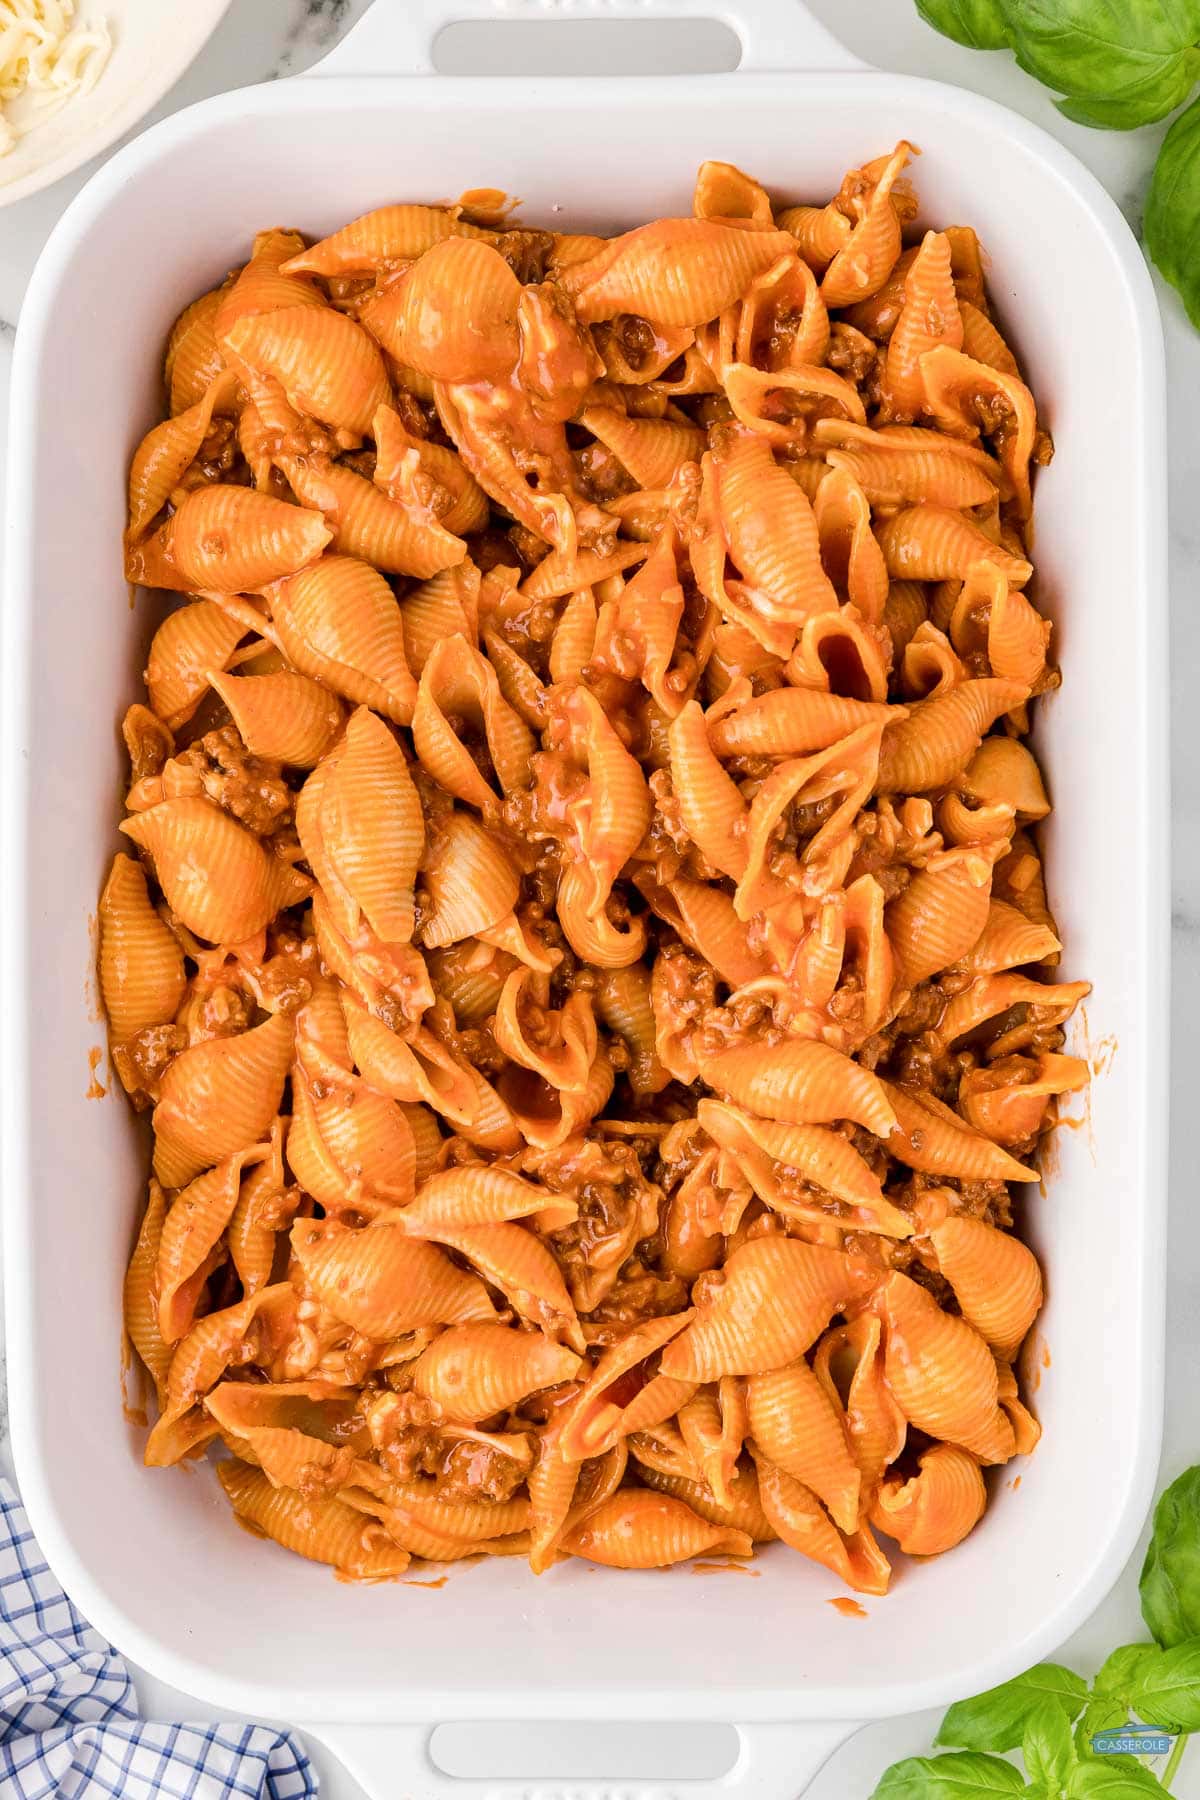 unbaked pasta casserole in a white dish